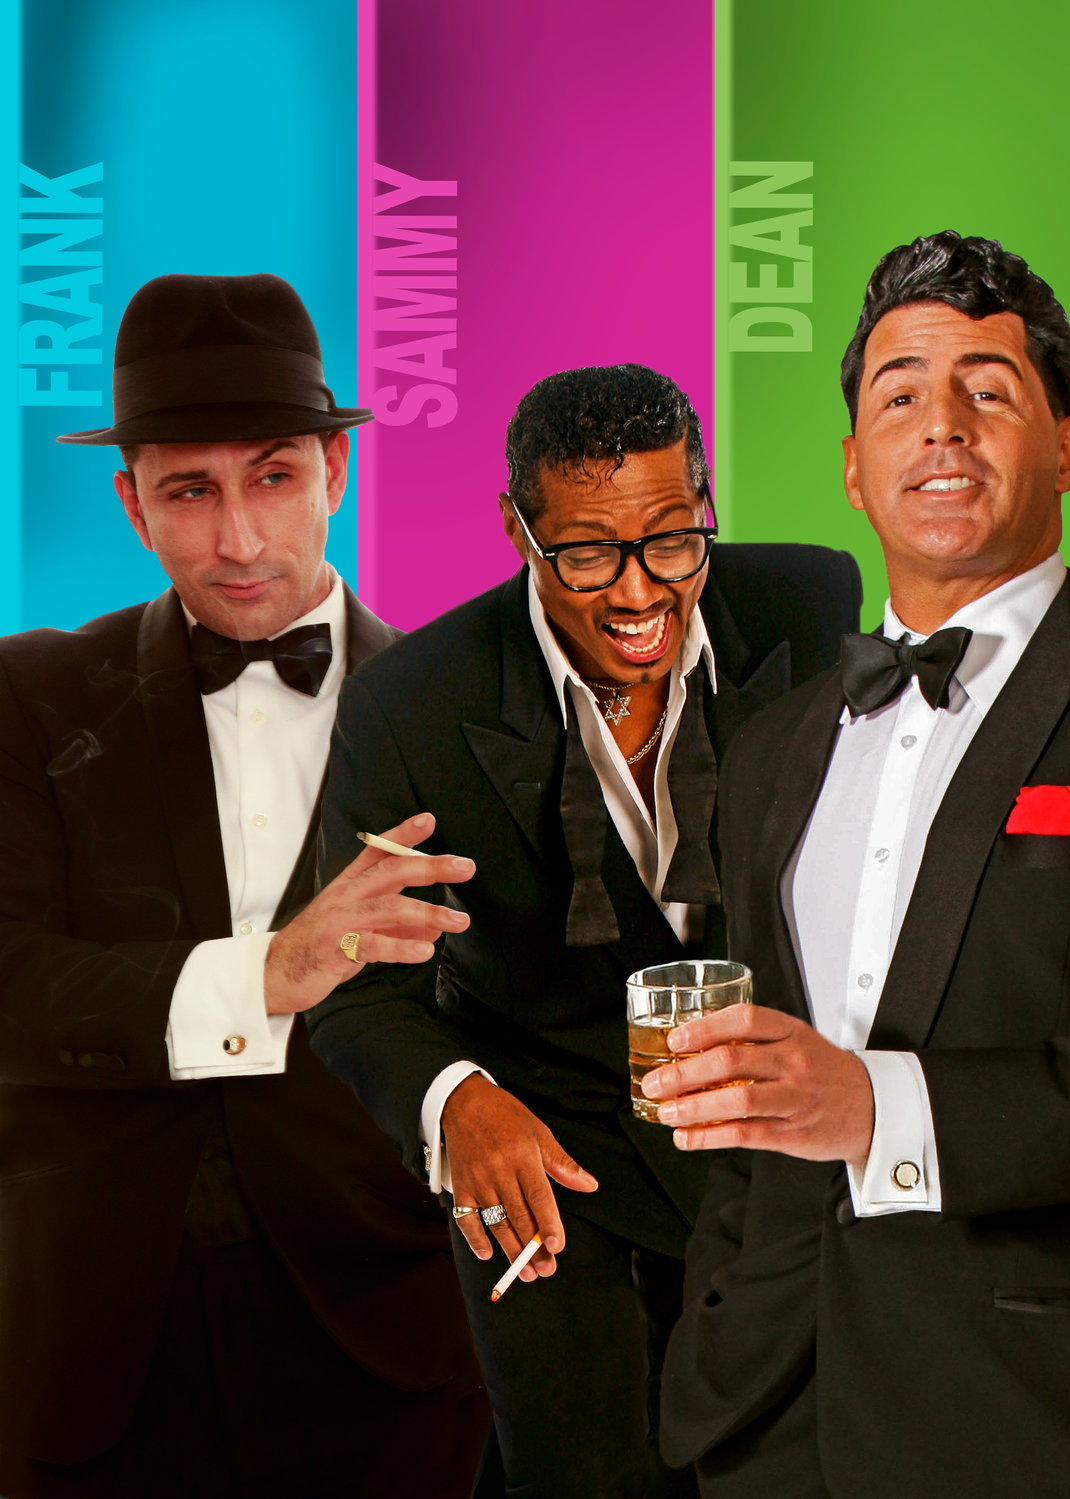 The Gateway is live streaming “The Rat Pack is Back” from Las Vegas via two shows on New Year’s Eve. In the photo (left to right) are Chris Jason as Frank Sinatra, Kyle Diamond as Sammy Davis Jr. and Drew Anthony as Dean Martin.